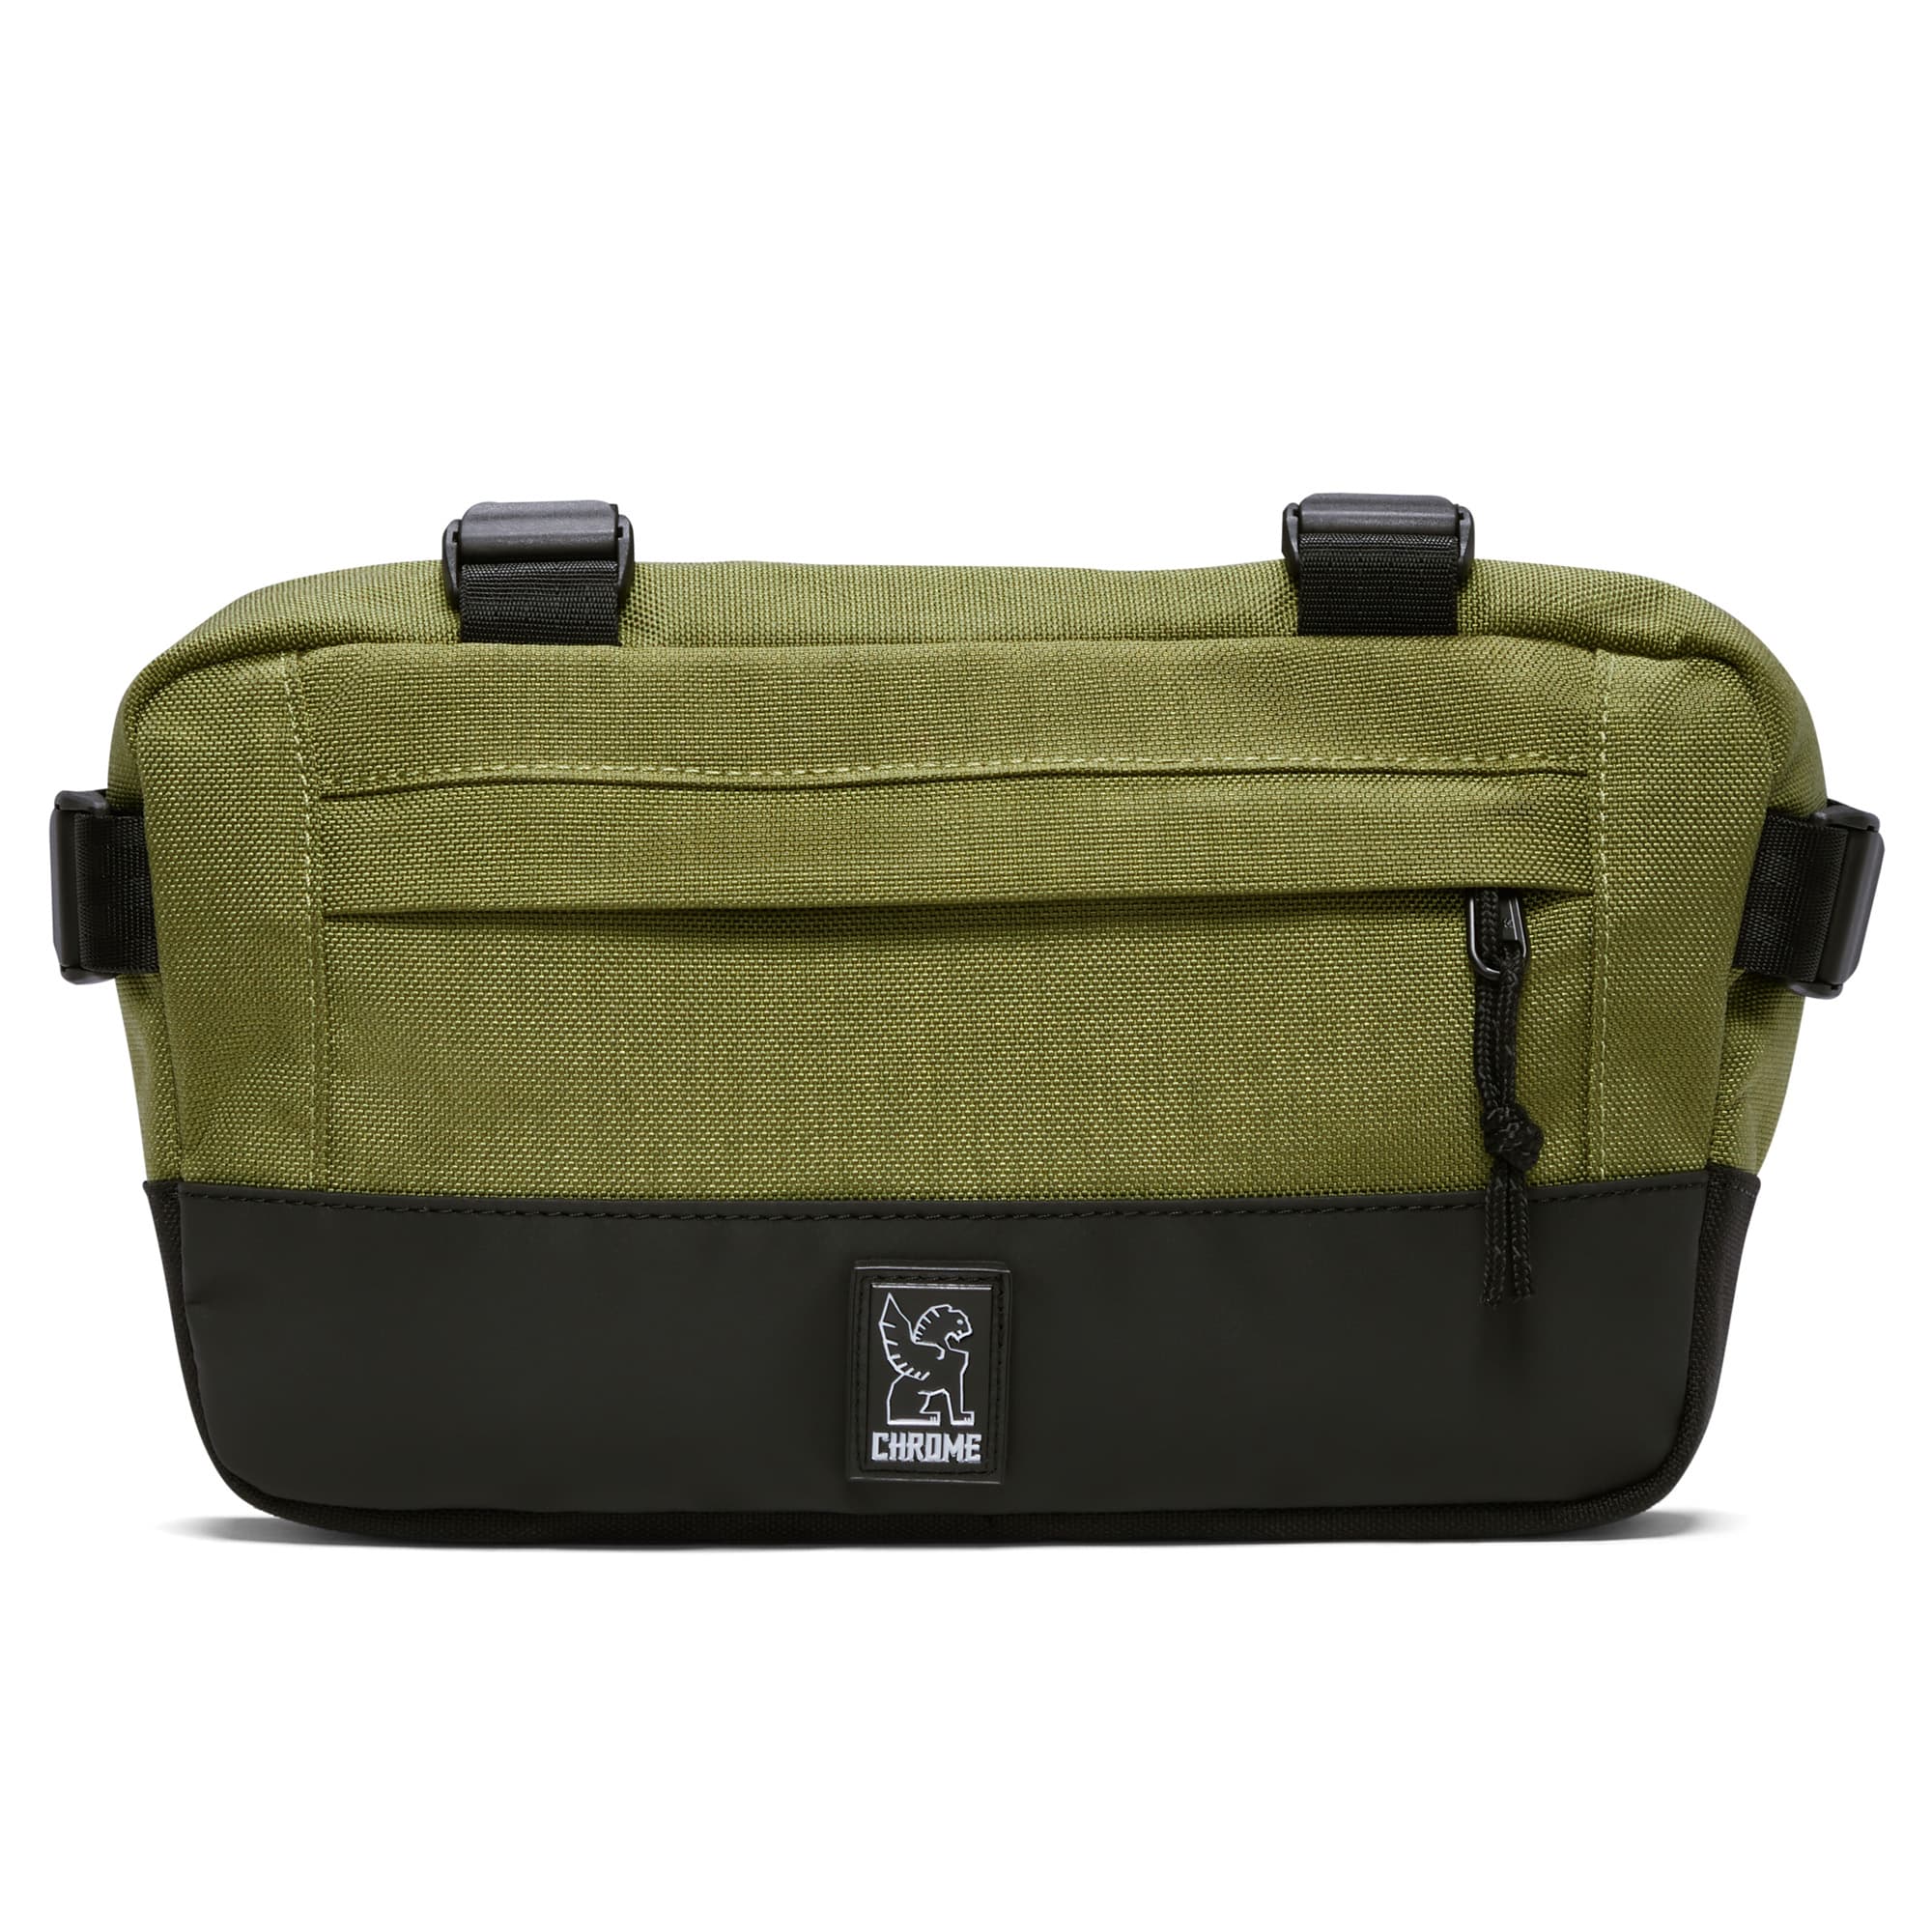 2L Doubletrack Frame Bag in green full on front view #color_olive branch